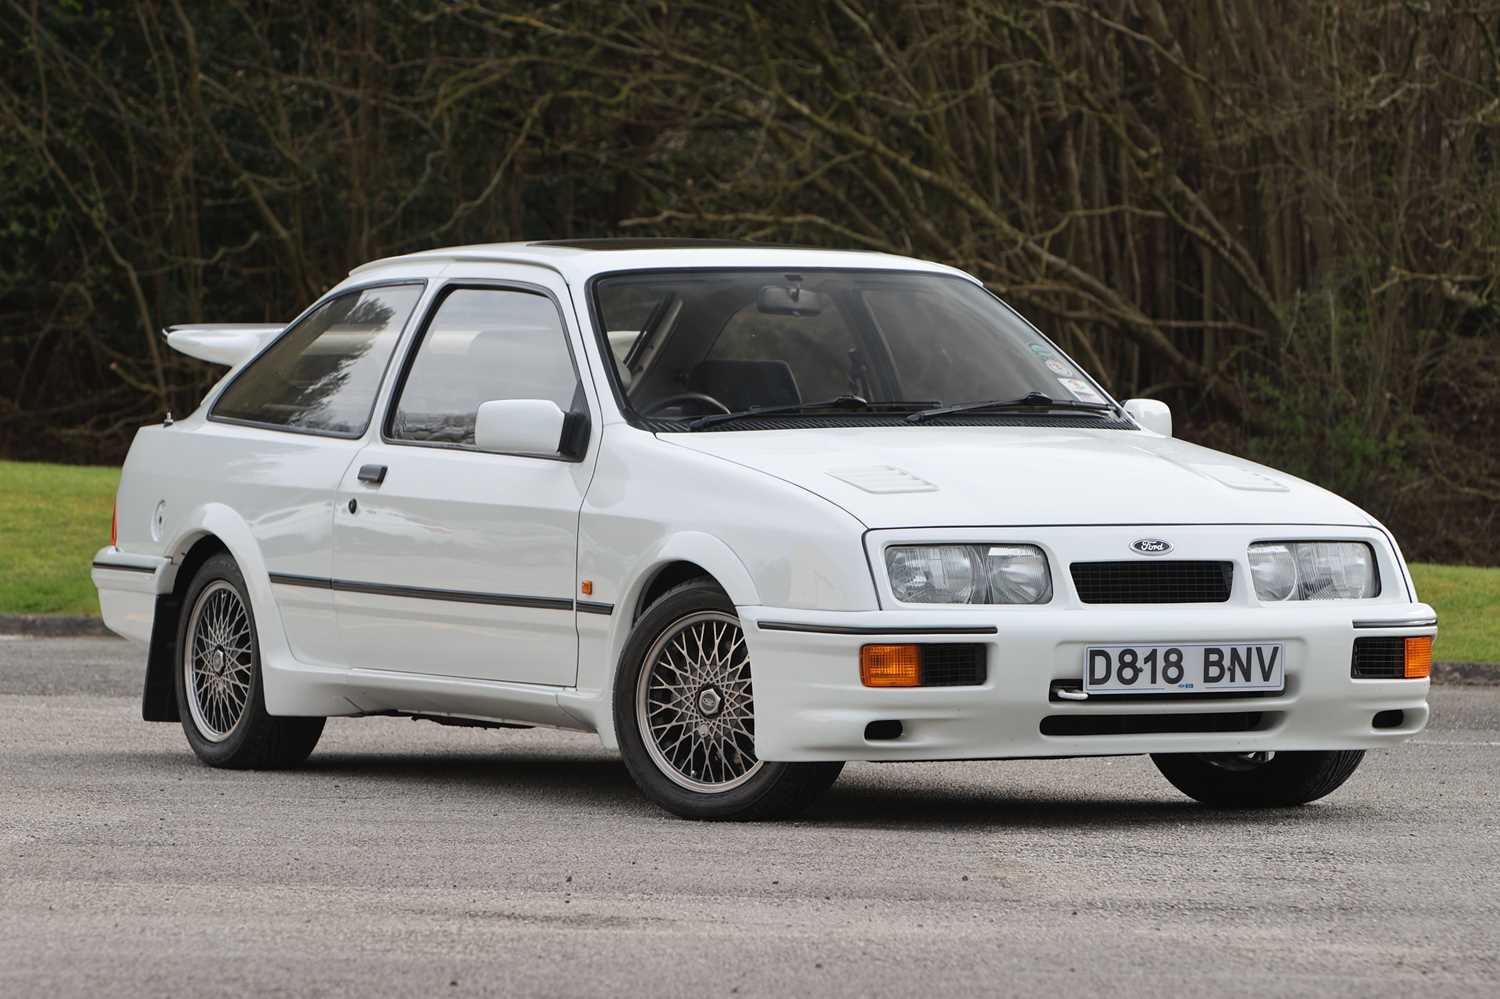 Lot 112 - 1987 Ford Sierra RS Cosworth